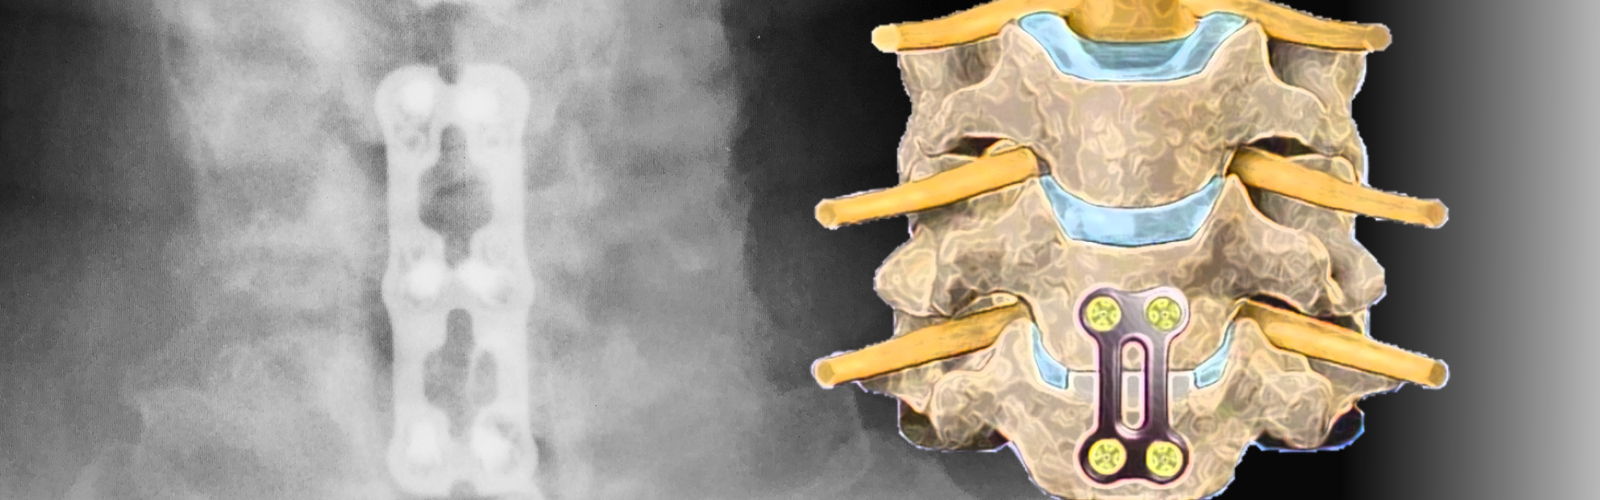 Anterior cervical discectomy and fusion | Atlantic Spine Specialists | NJ